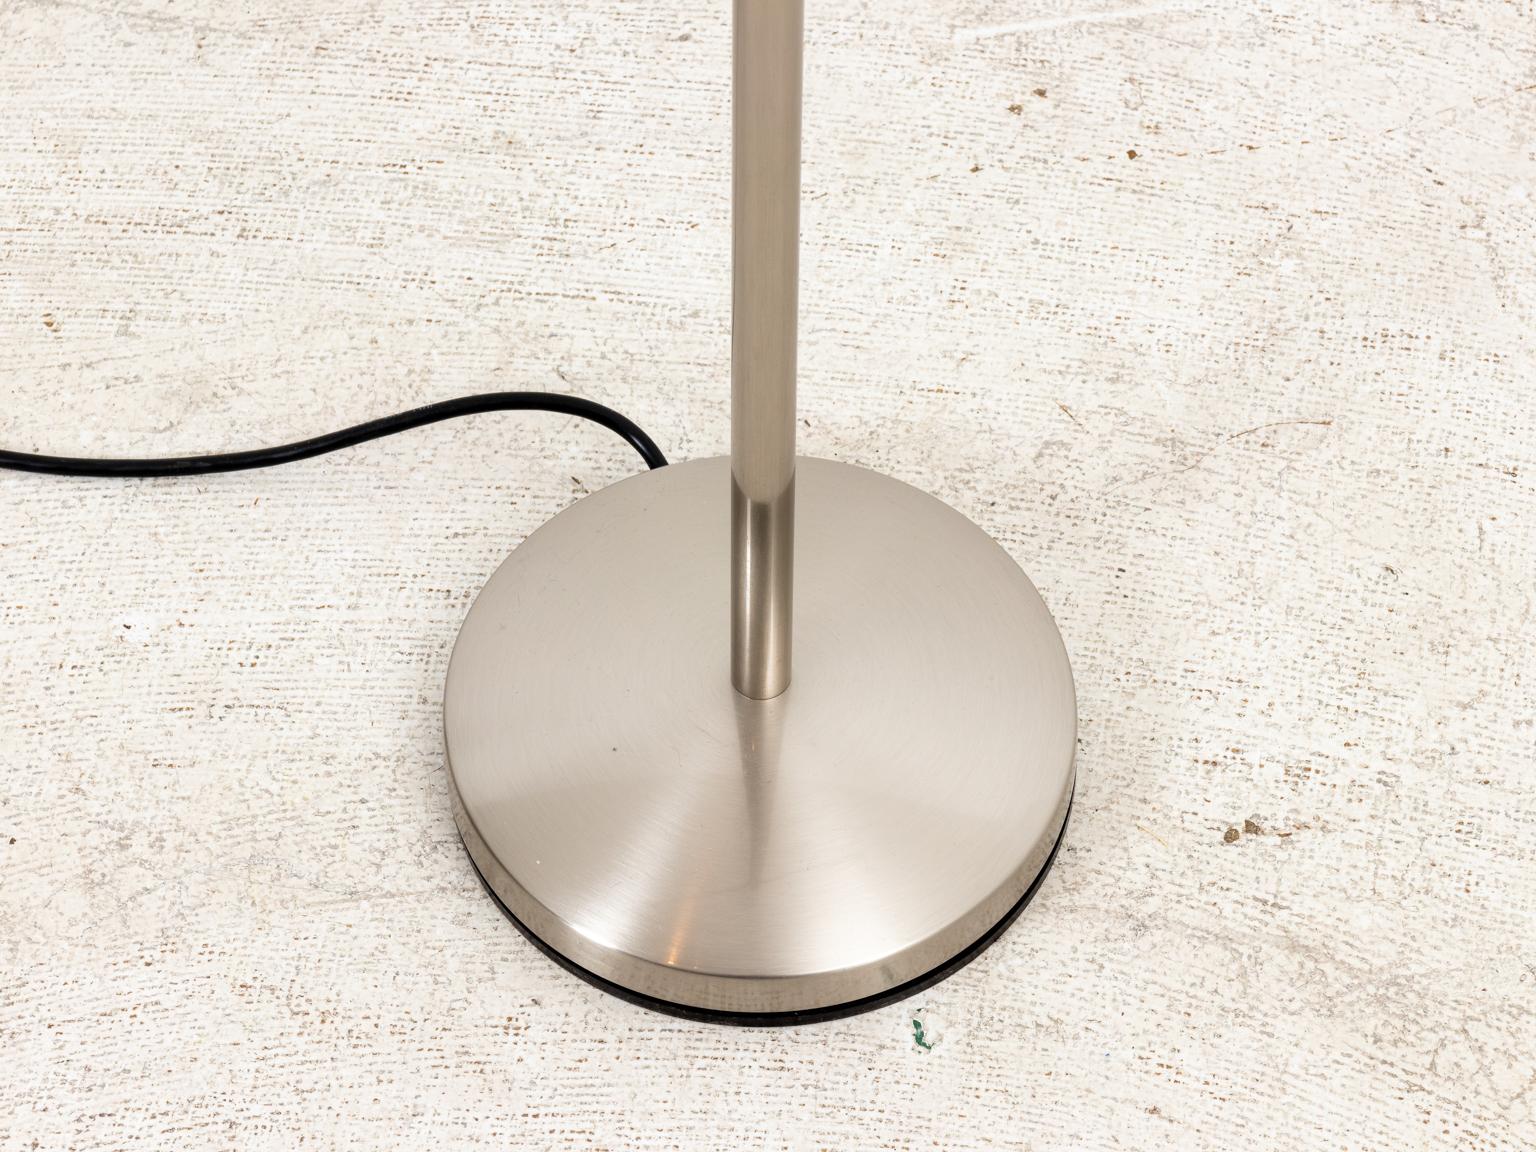 Estiluz brushed nickel floor lamps, circa 21st century. Please note of wear consistent with age.